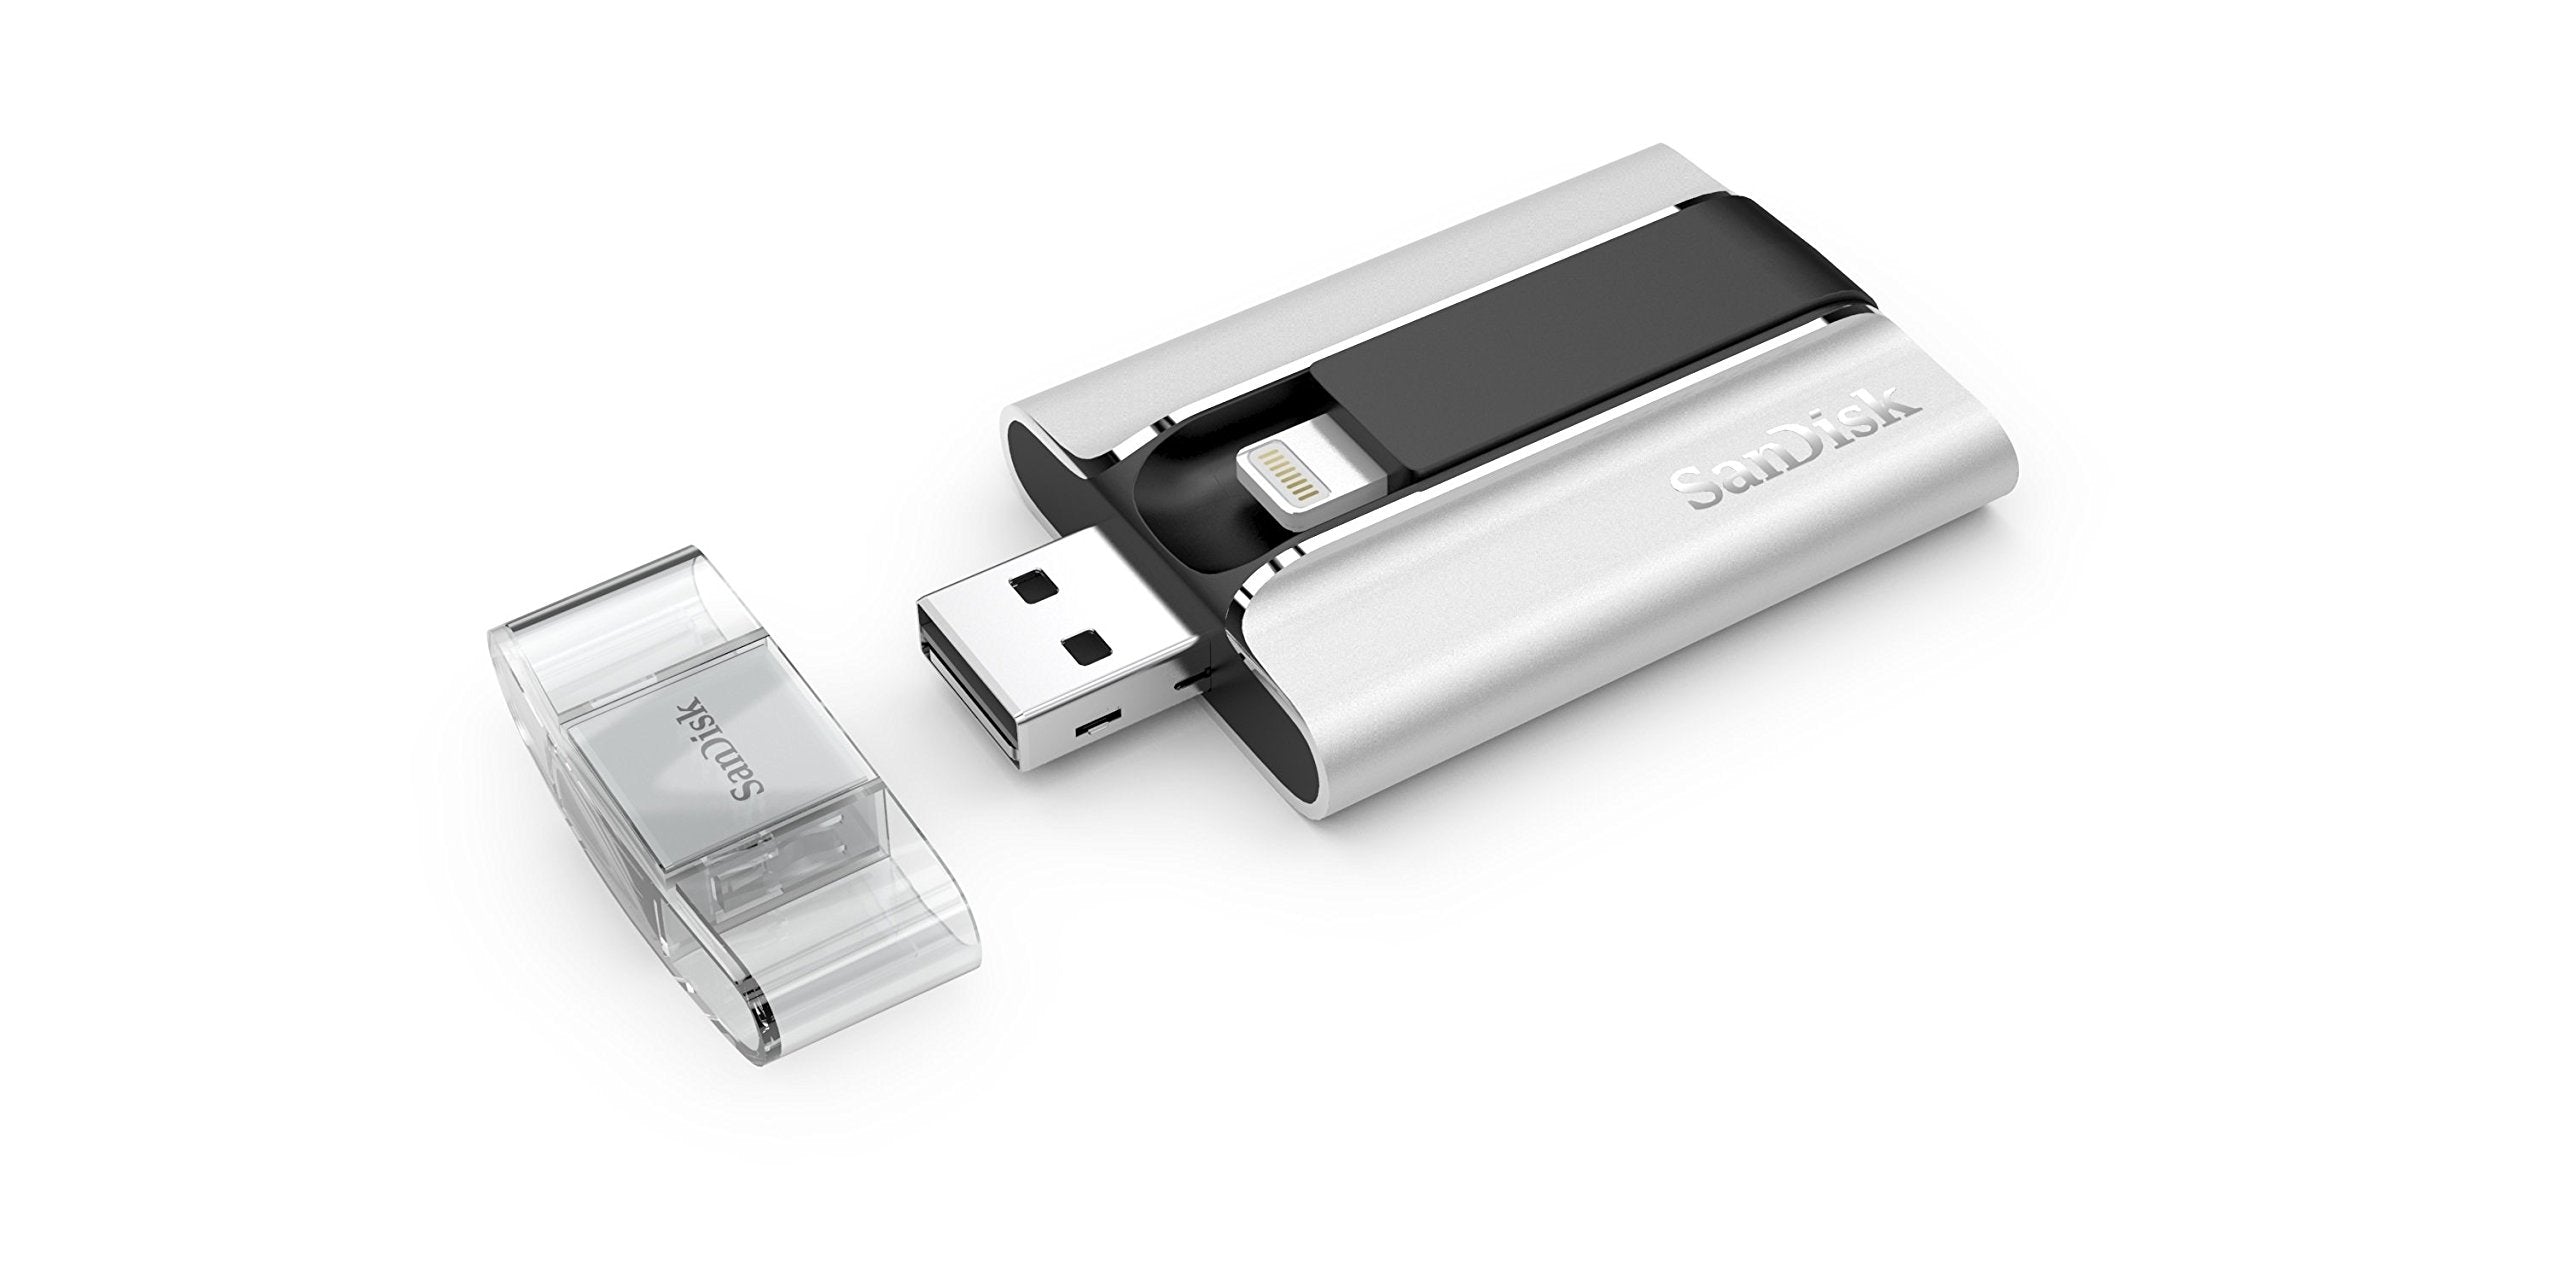 SanDisk iXpand 32GB USB 2.0 Mobile Flash Drive with Lightning connector For iPhones, iPads & Computers- SDIX-032G-G57 Old Version